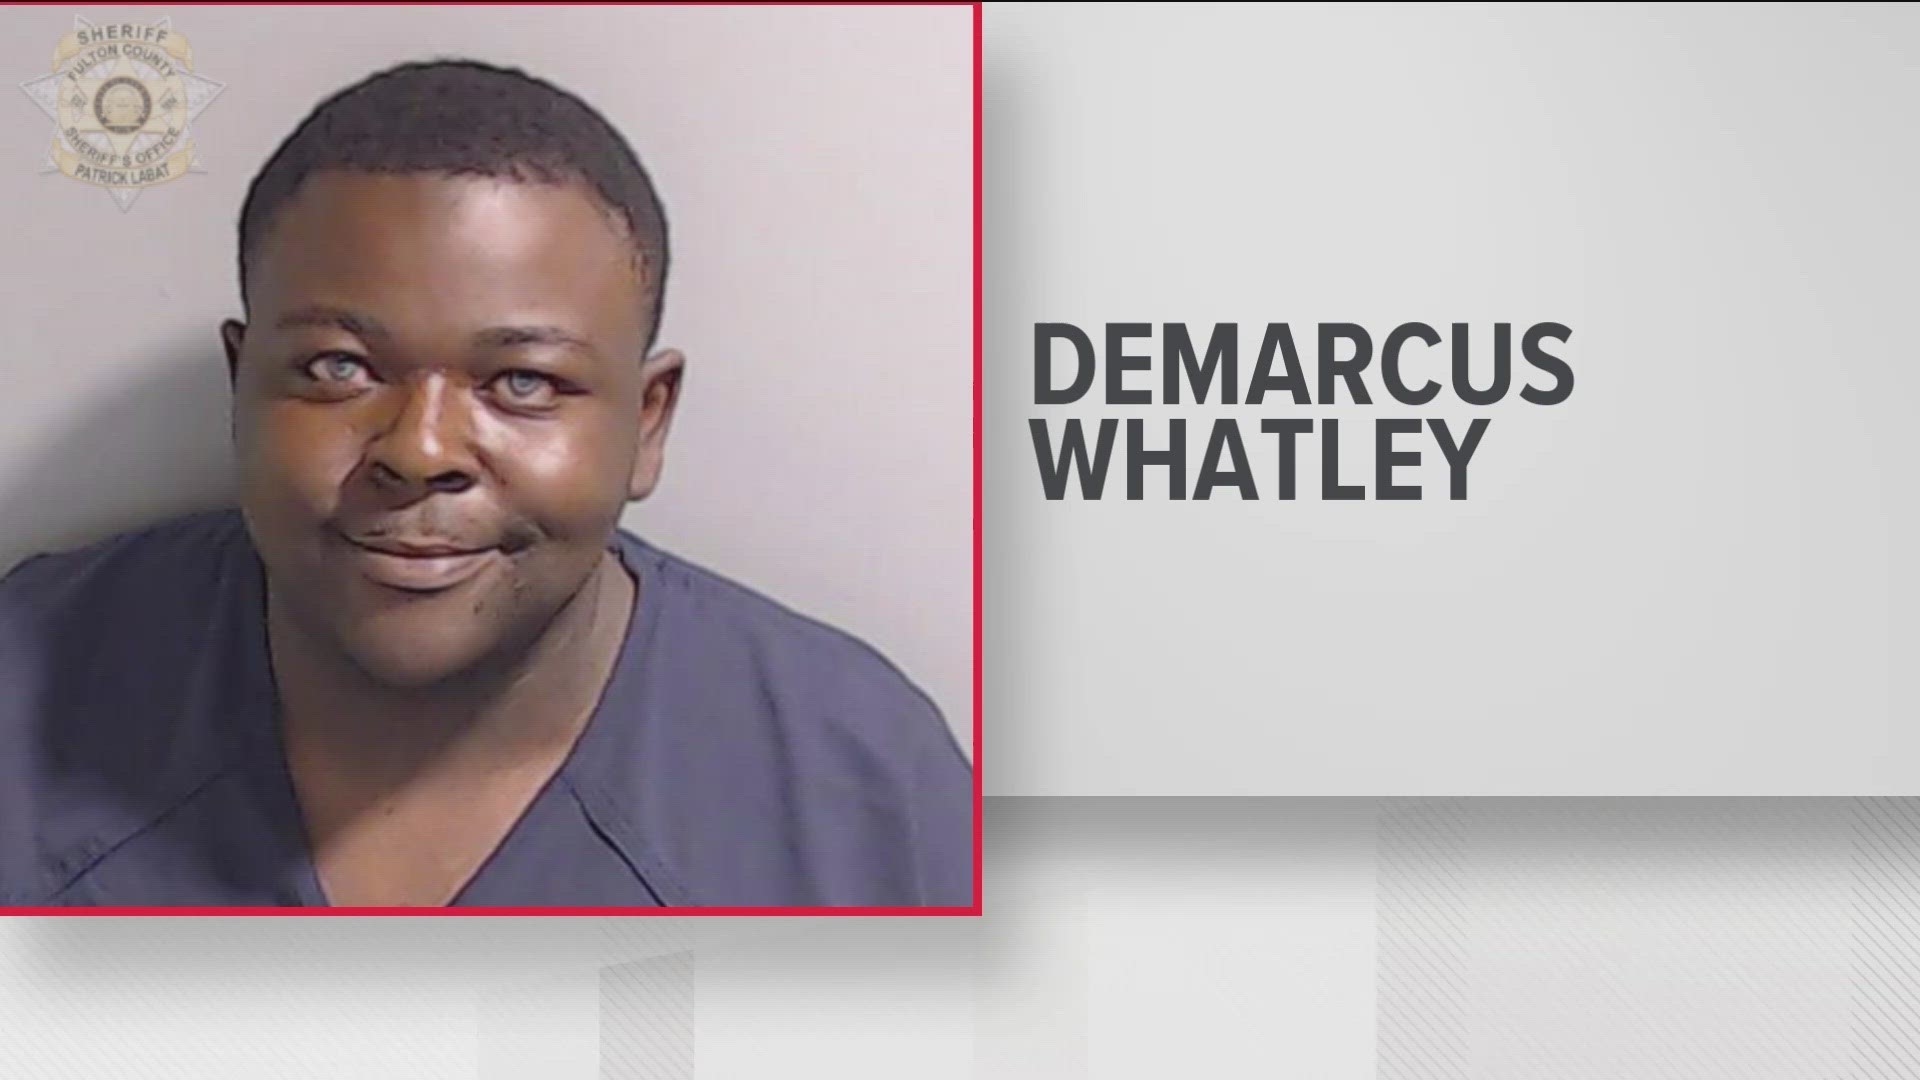 Demarcus Whatley was hired March 1 of this year. He's currently being held at the Fulton County Jail without bond.